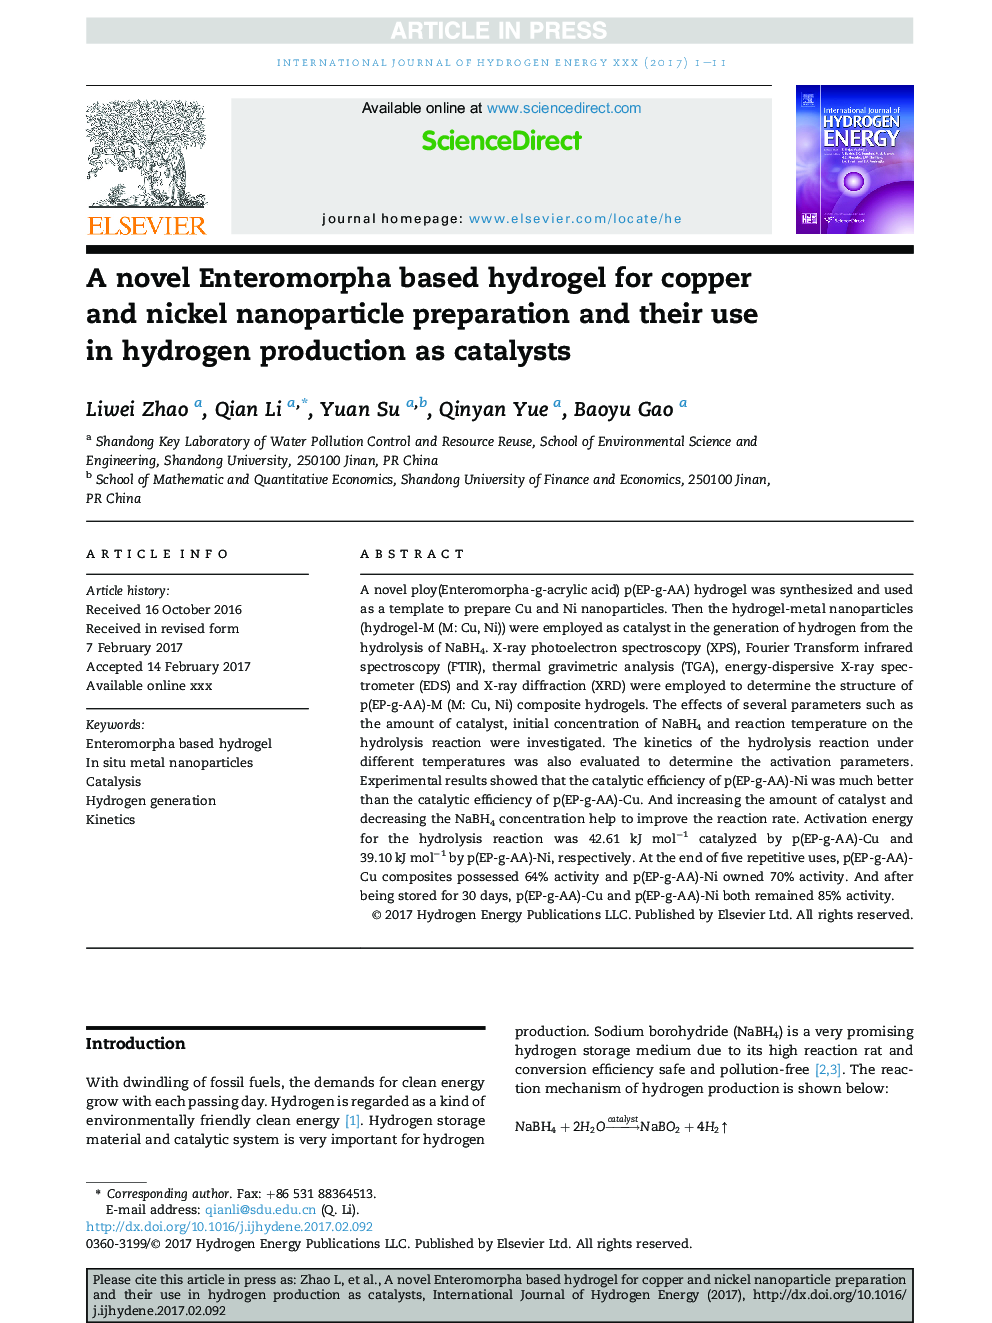 A novel Enteromorpha based hydrogel for copper and nickel nanoparticle preparation and their use in hydrogen production as catalysts